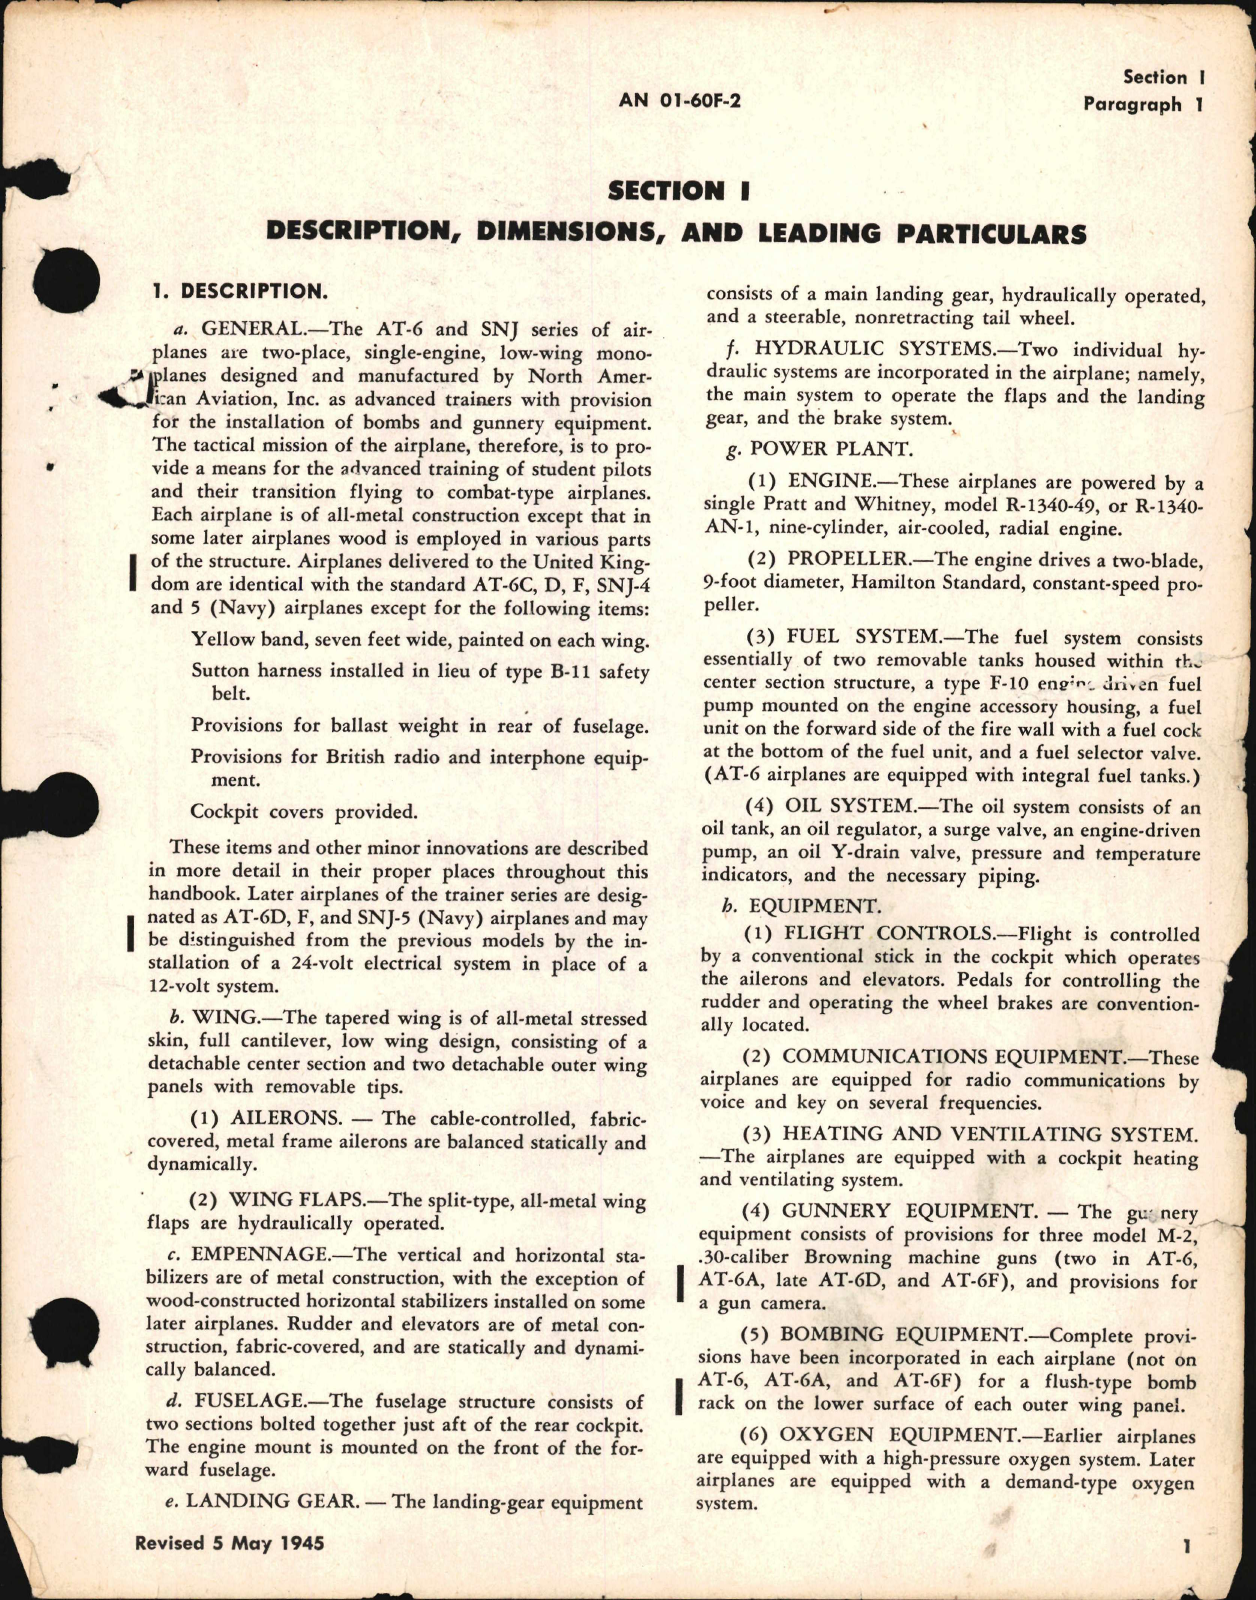 Sample page 1 from AirCorps Library document: Erection and Maintenance Instructions for T-6D, T-6F, SNJ-5, and SNJ-6